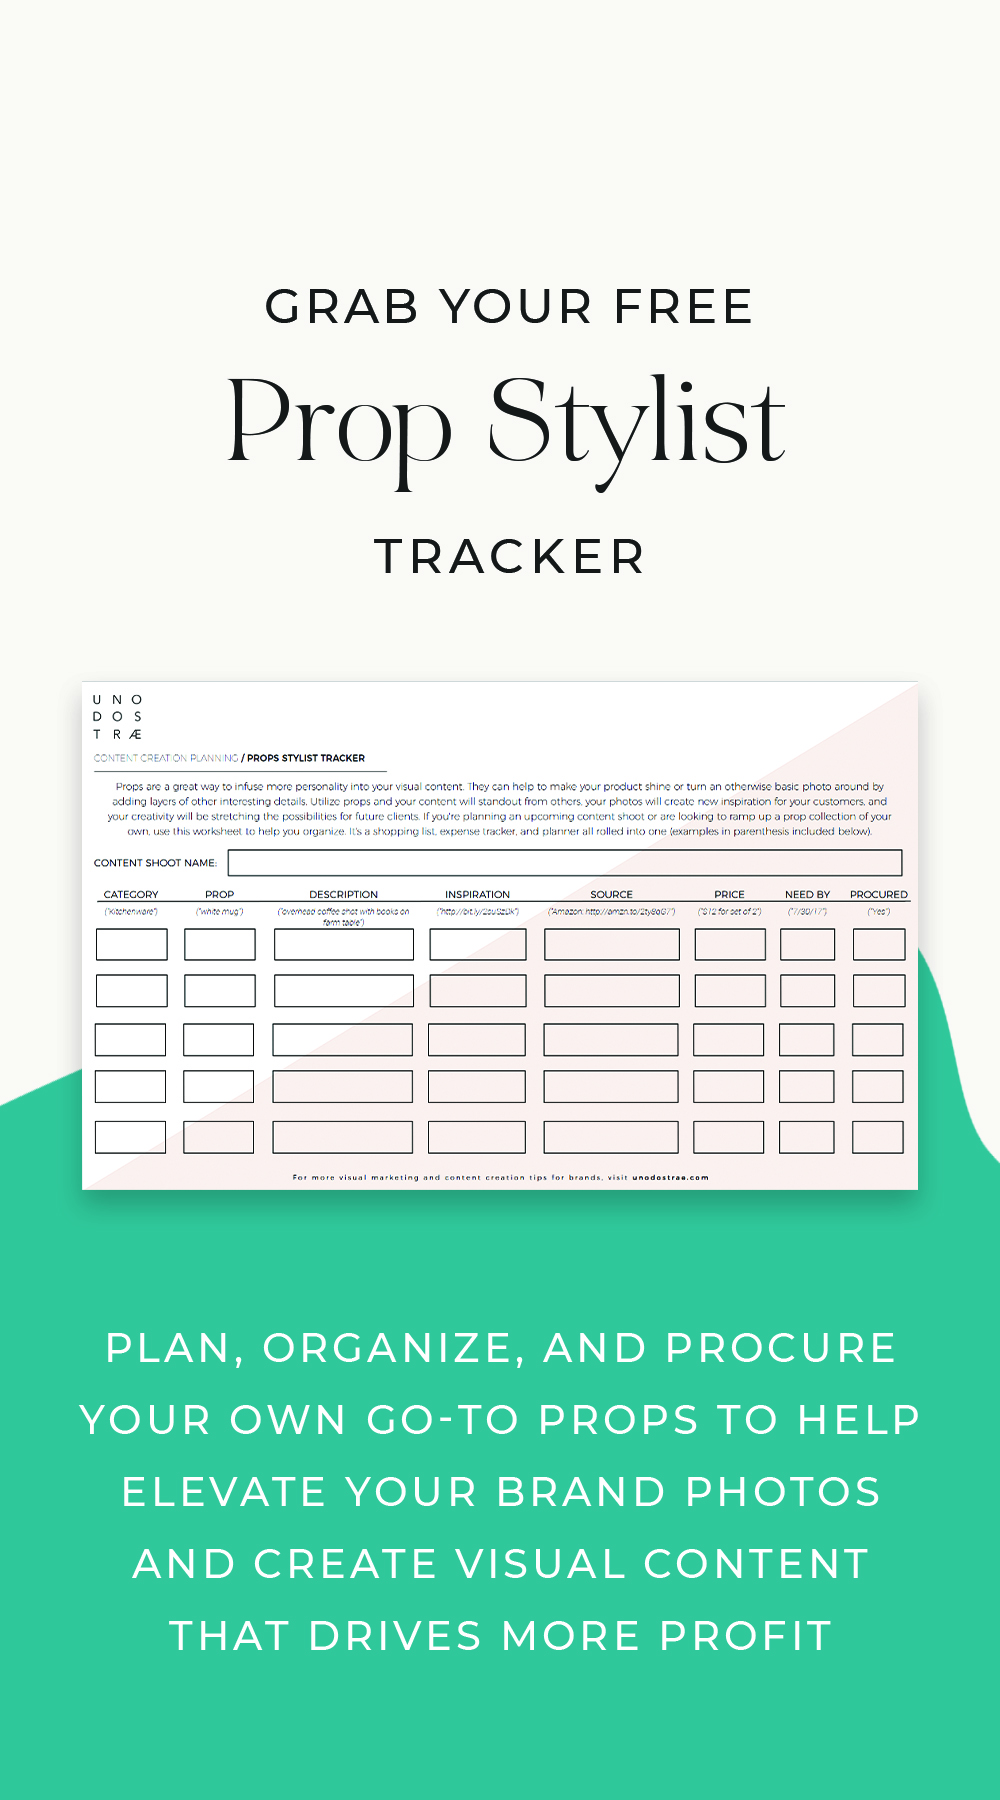 Download the Props Stylist Tracker, an interactive tool to help you plan and organize your list of props to elevate your brand photography and visual content